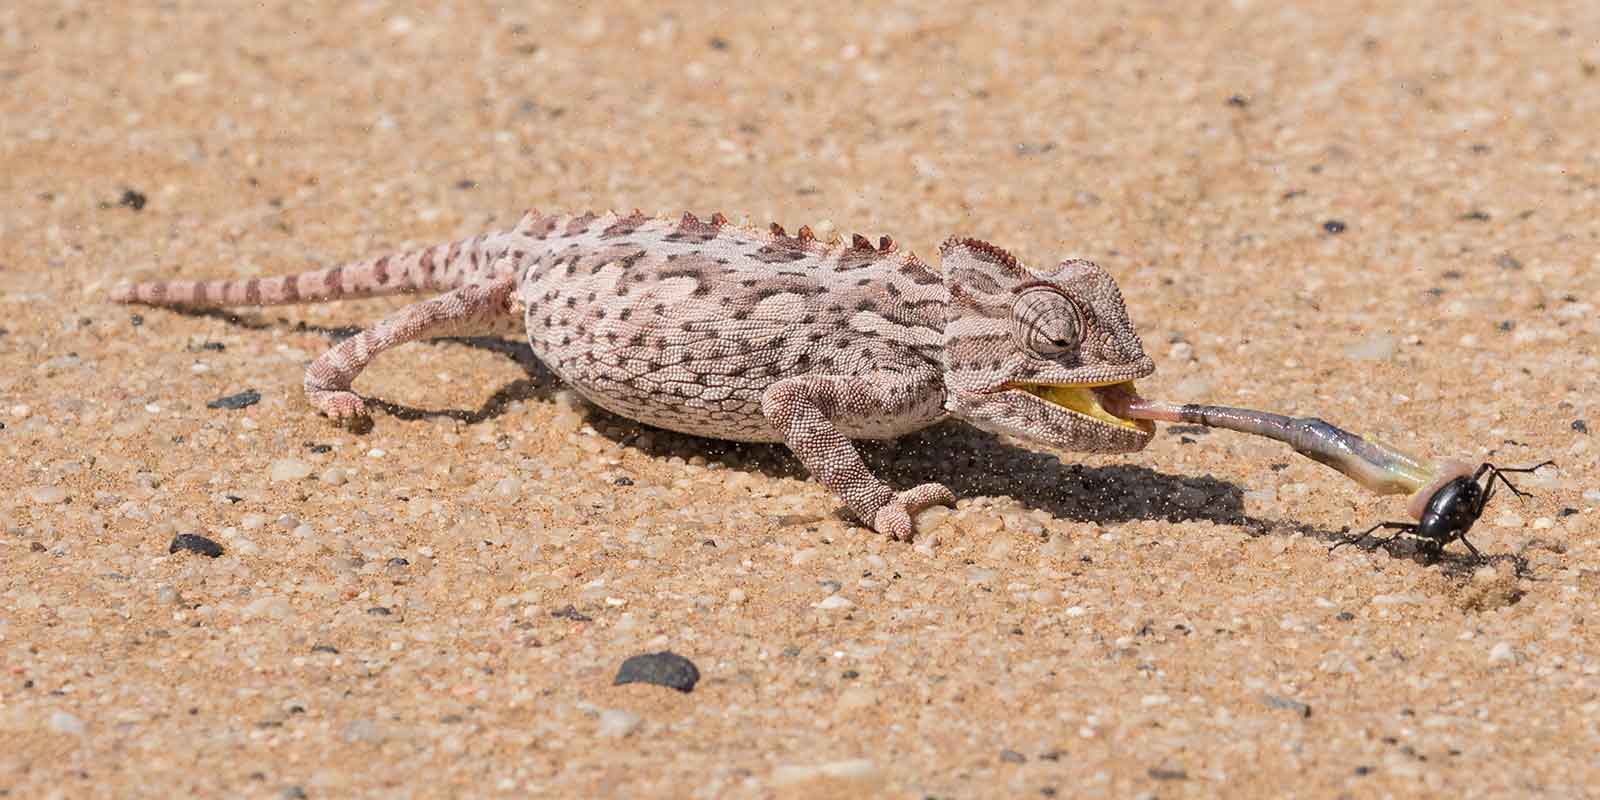 Chameleon catching a beetle with tongue in the Namibia desert